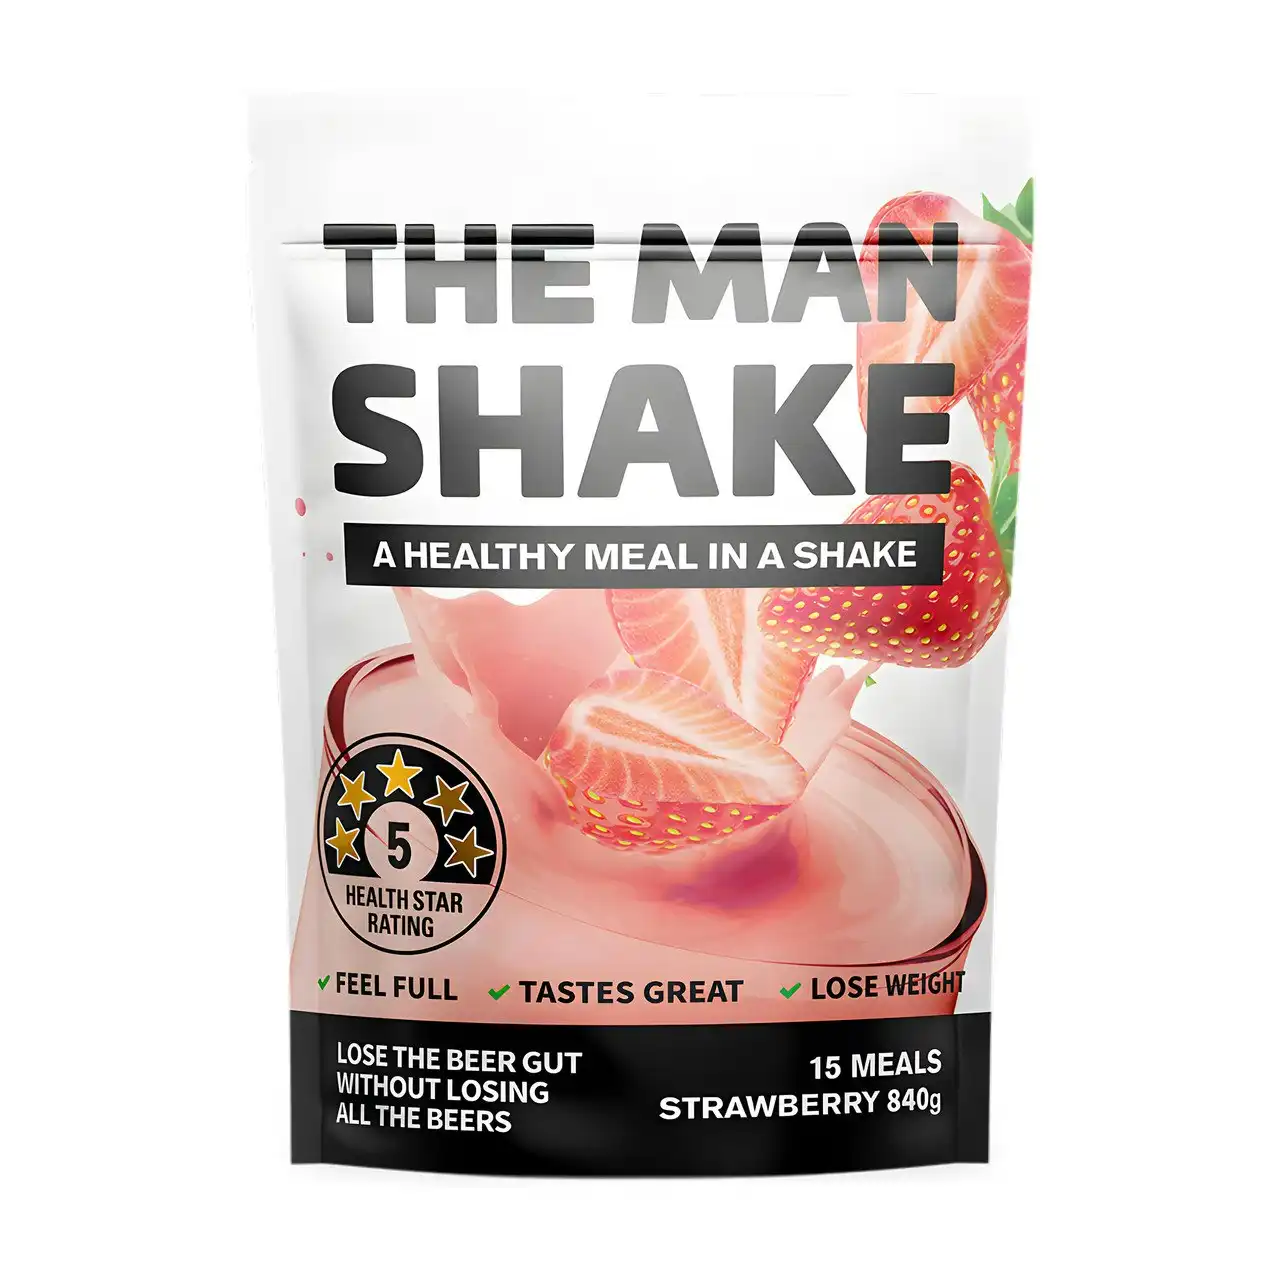 The Man Shake Strawberry Flavour 840g